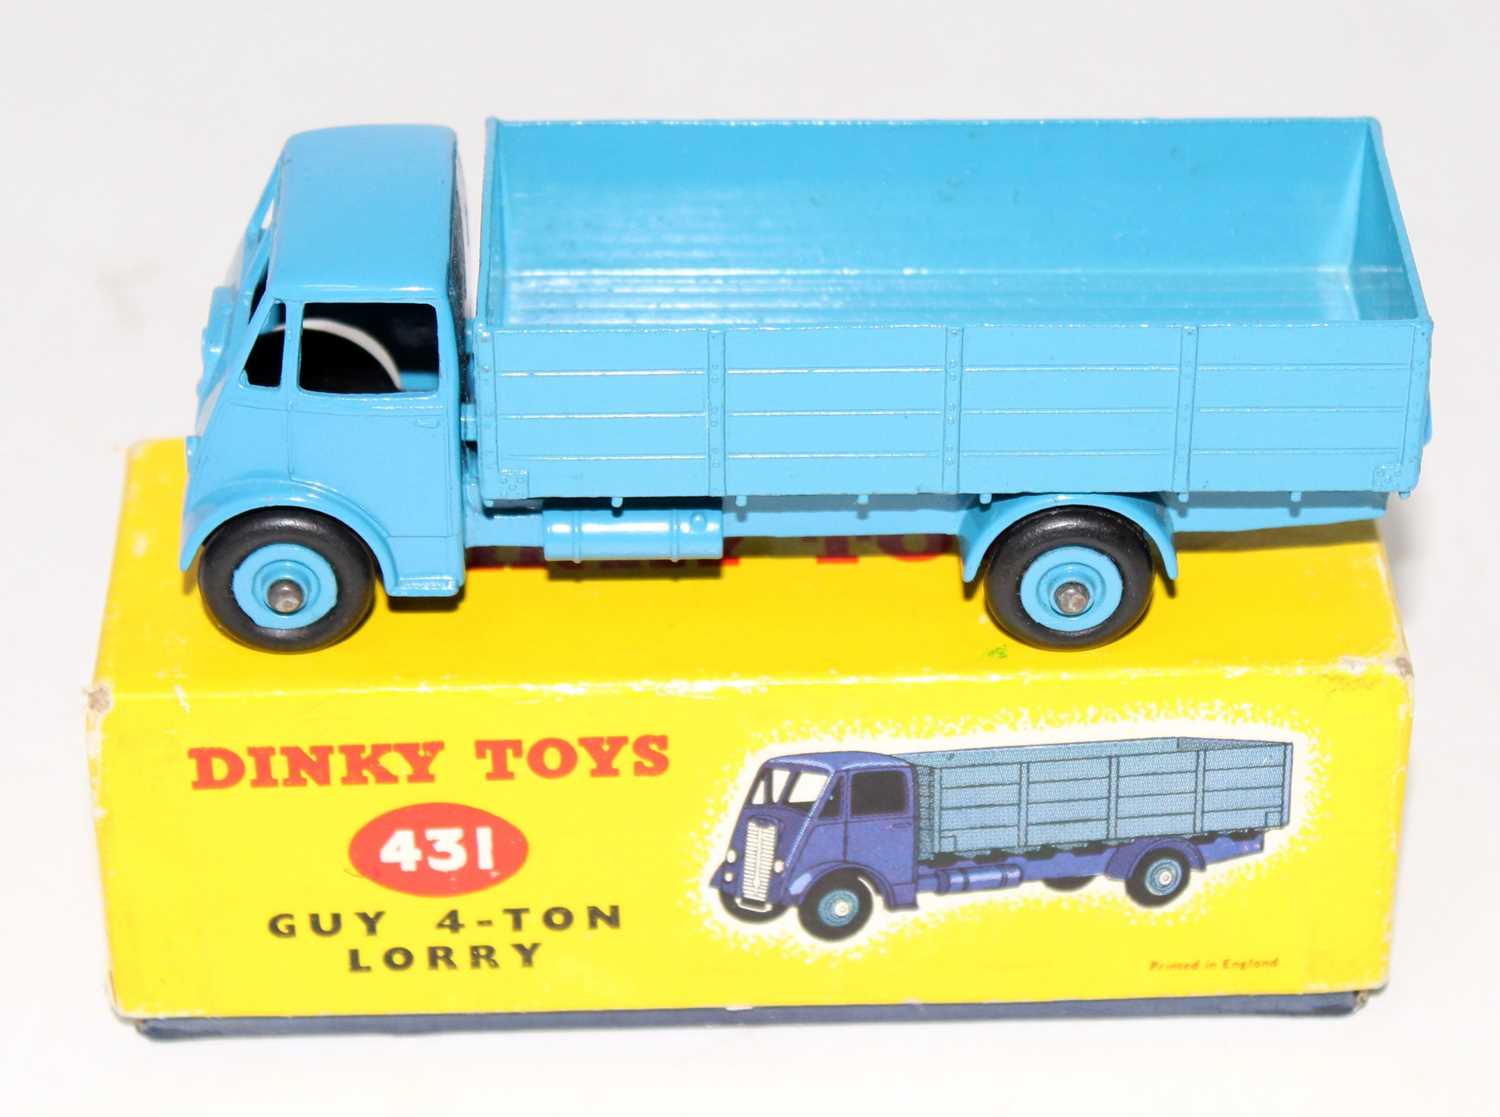 A Dinky Toys No. 431 guy 4 ton lorry comprising of mid blue cab, chassis and back, with Supertoys